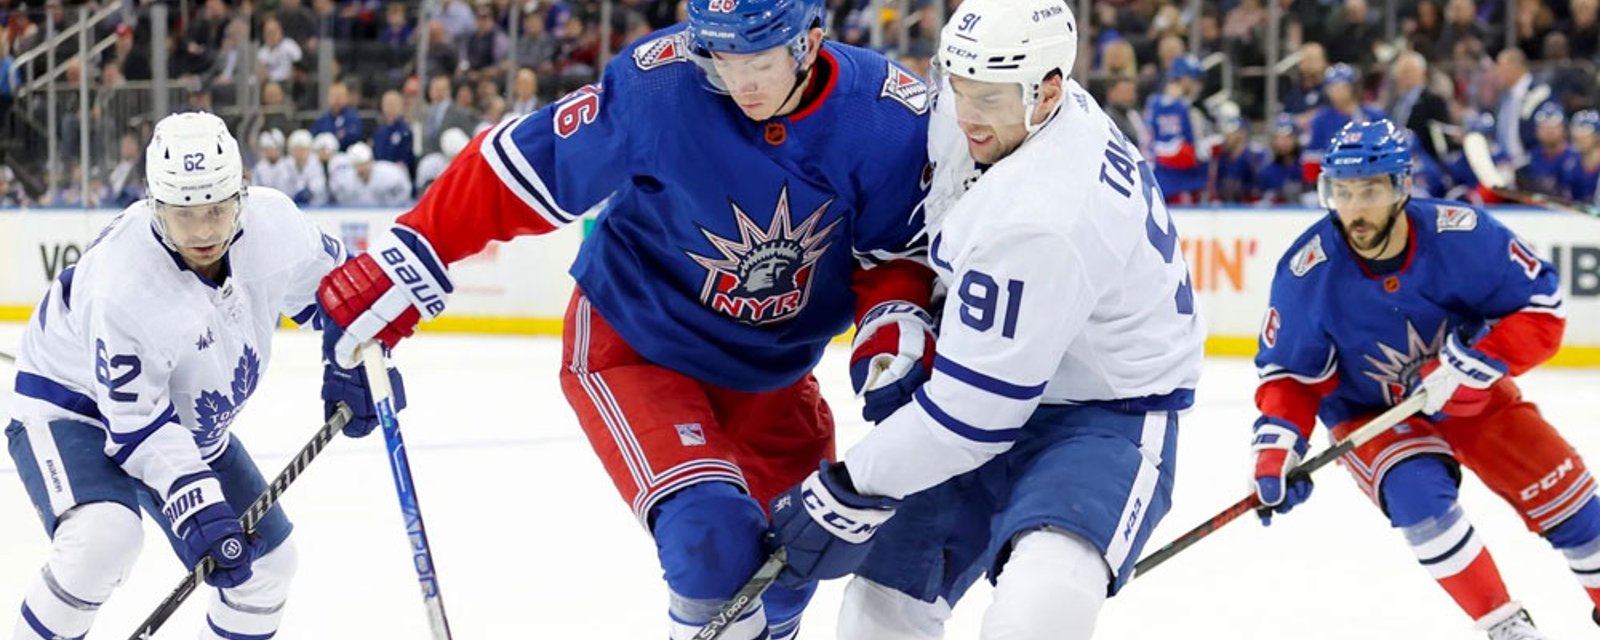 Leafs announce a delayed start for tonight's game against the Rangers